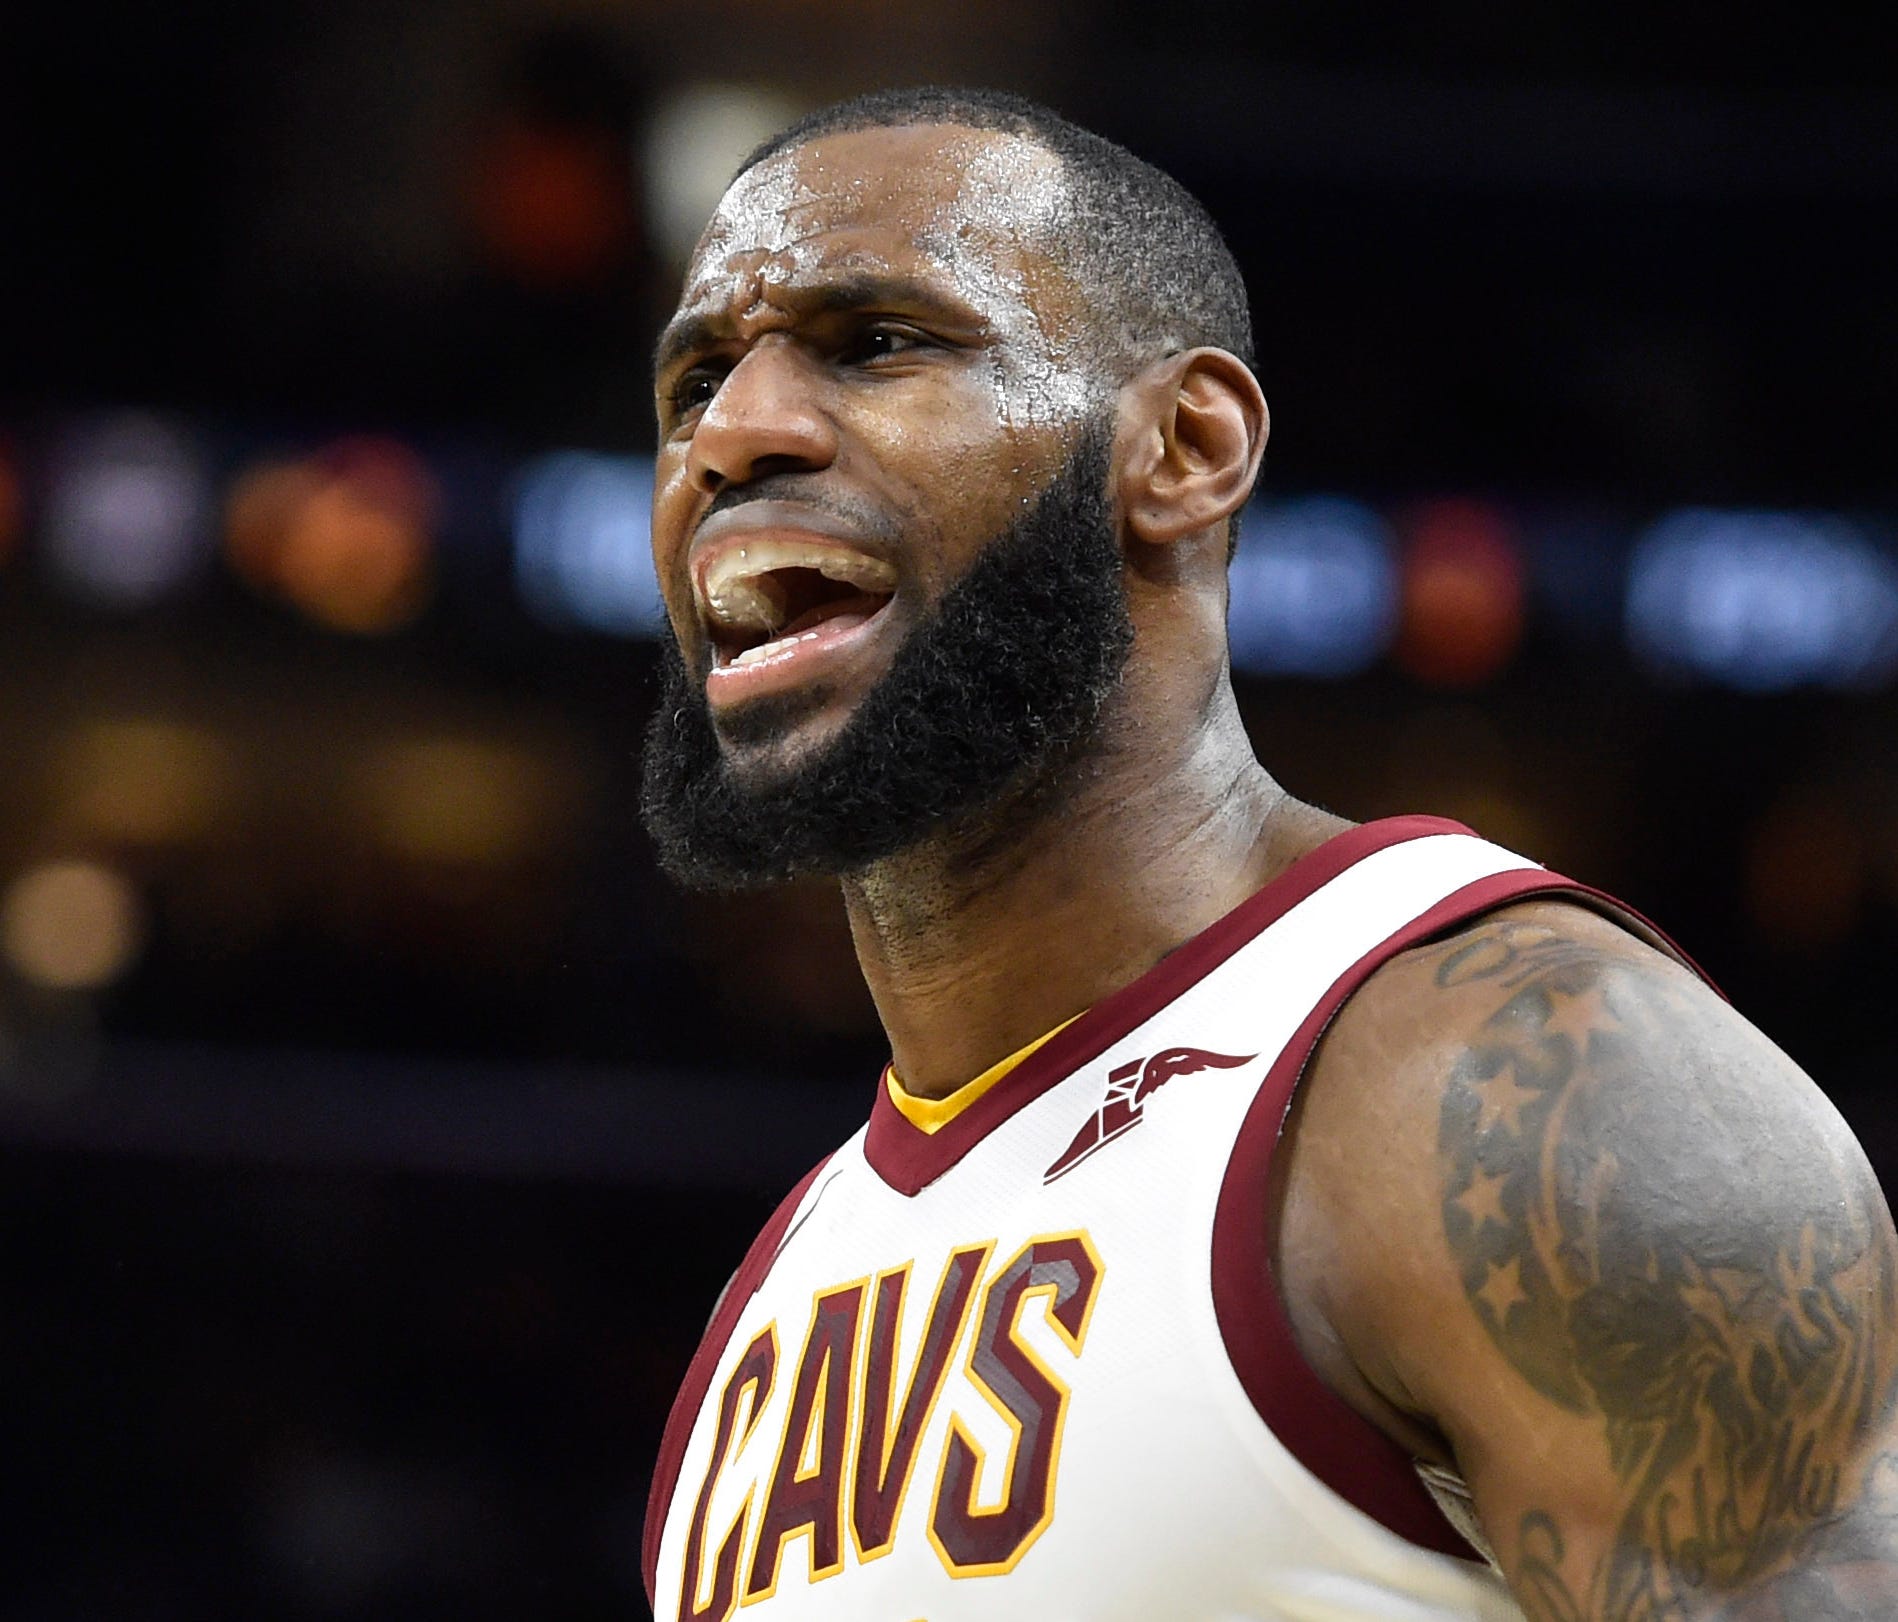 LeBron James was ejected Tuesday night for the first time in his NBA career.